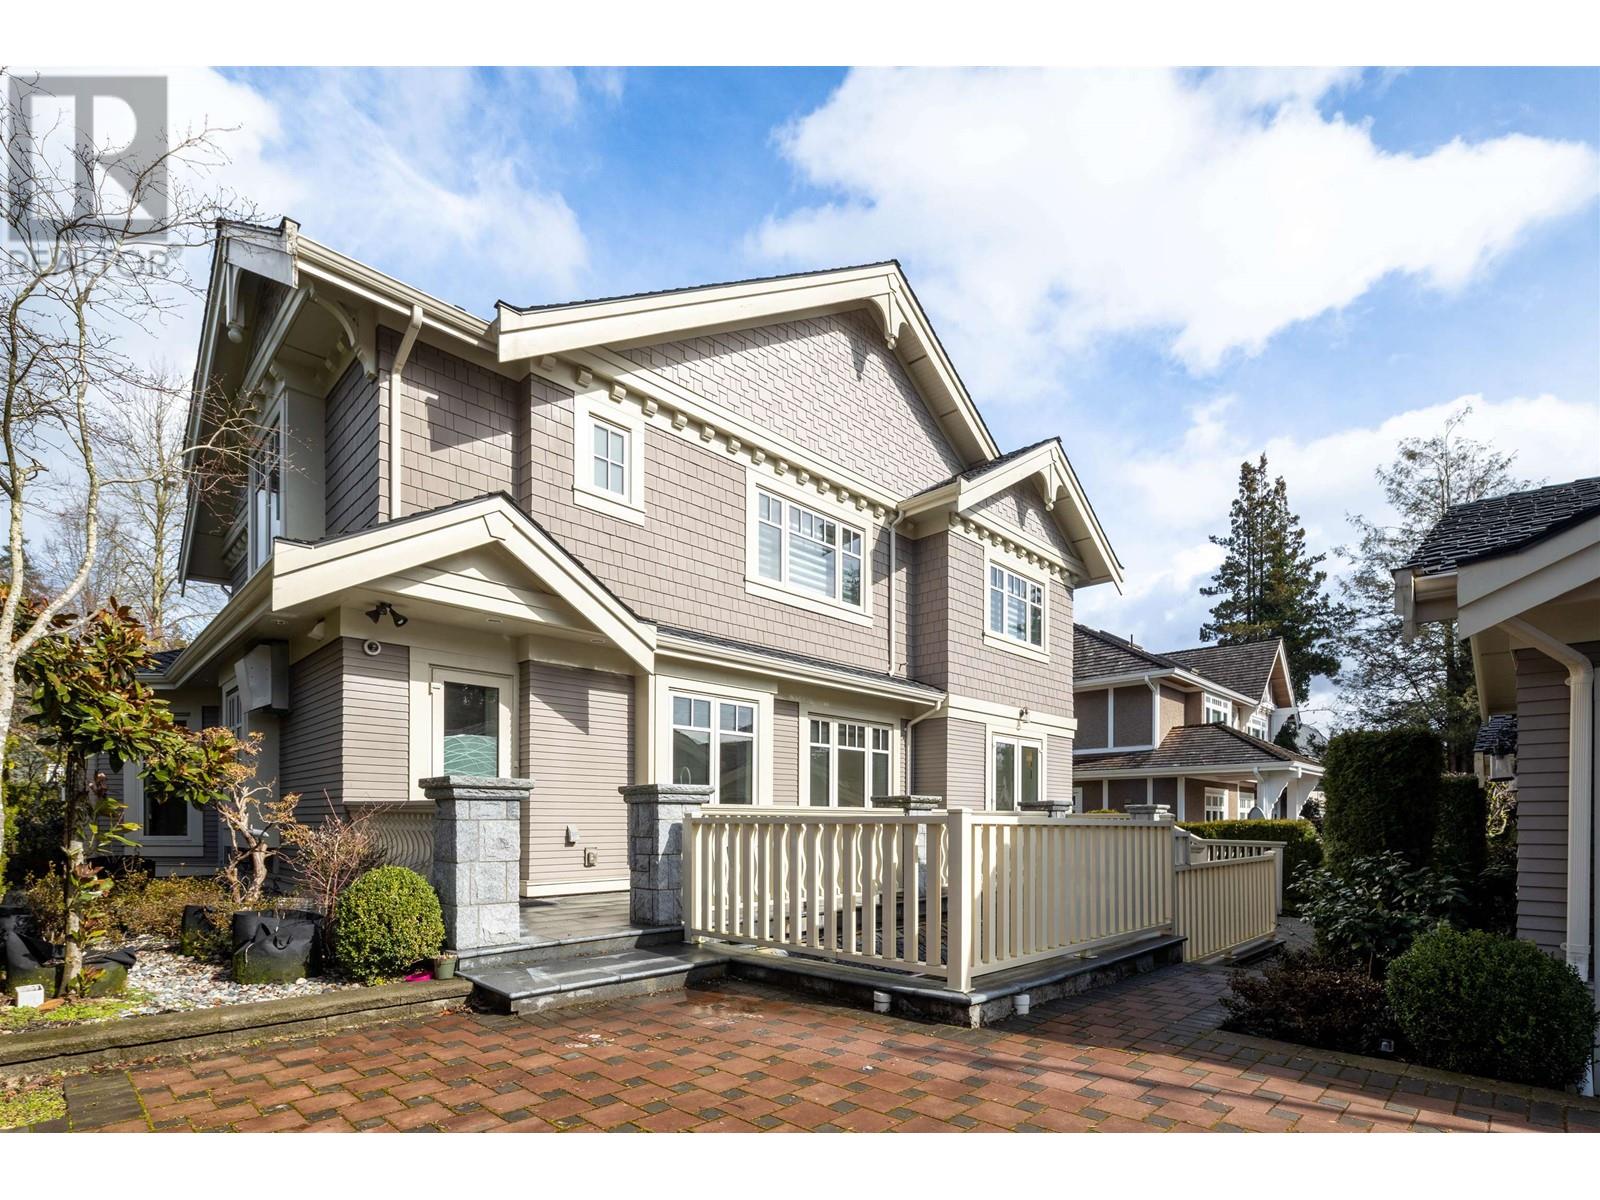 Listing Picture 39 of 39 : 1192 W 38TH AVENUE, Vancouver / 溫哥華 - 魯藝地產 Yvonne Lu Group - MLS Medallion Club Member